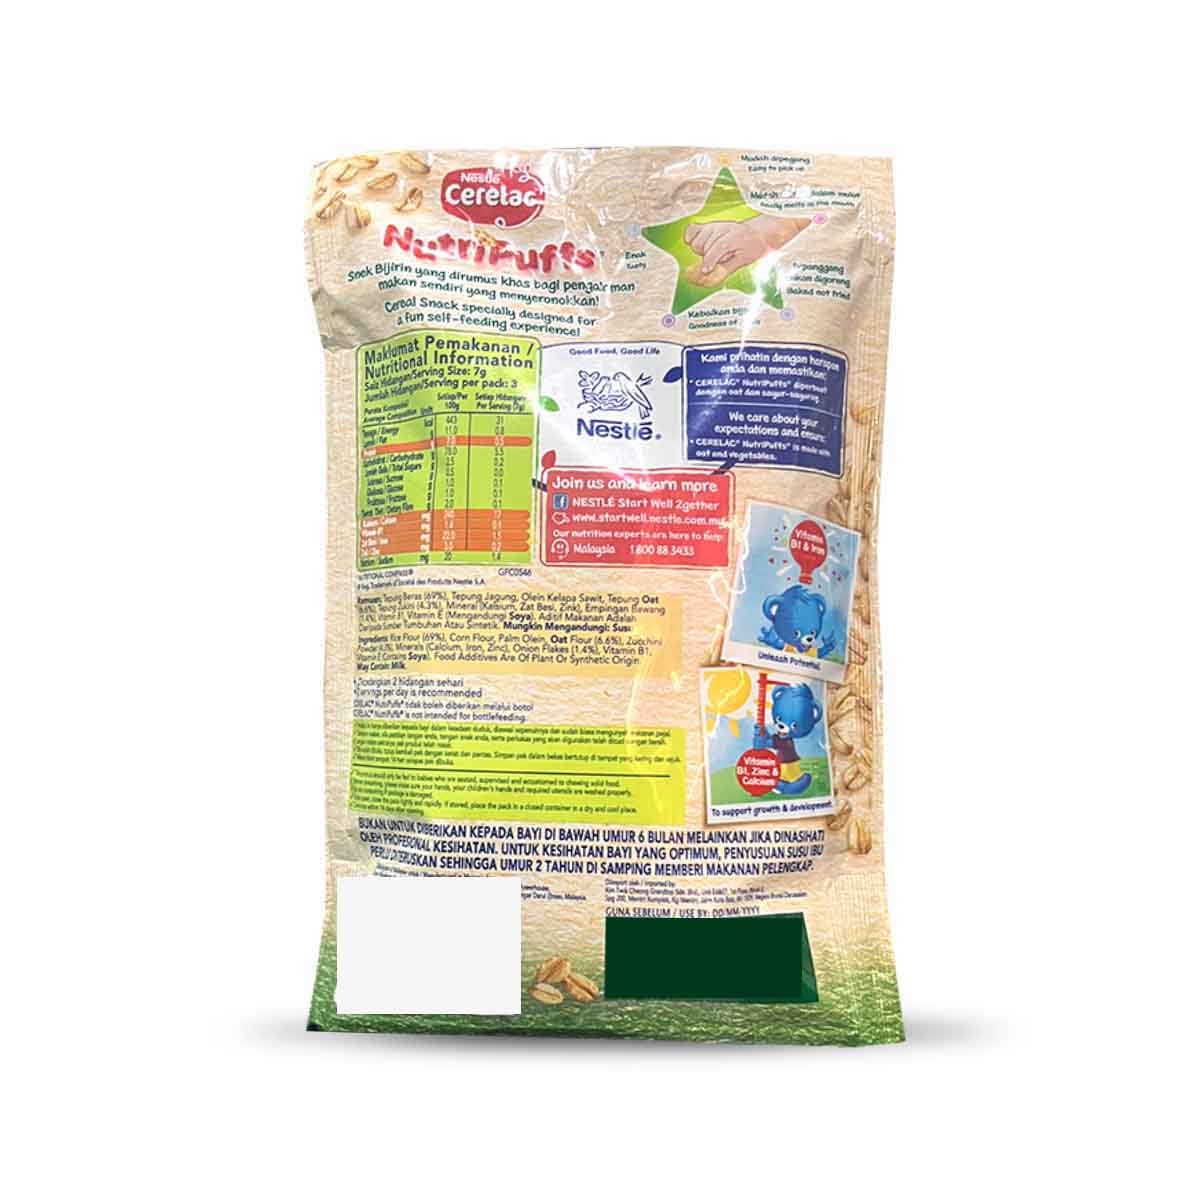 Buy Nestle Cerelac Nutri Puffs Baby Snack with Zucchini & Onion - 25gms Online in India at uyyaala.com